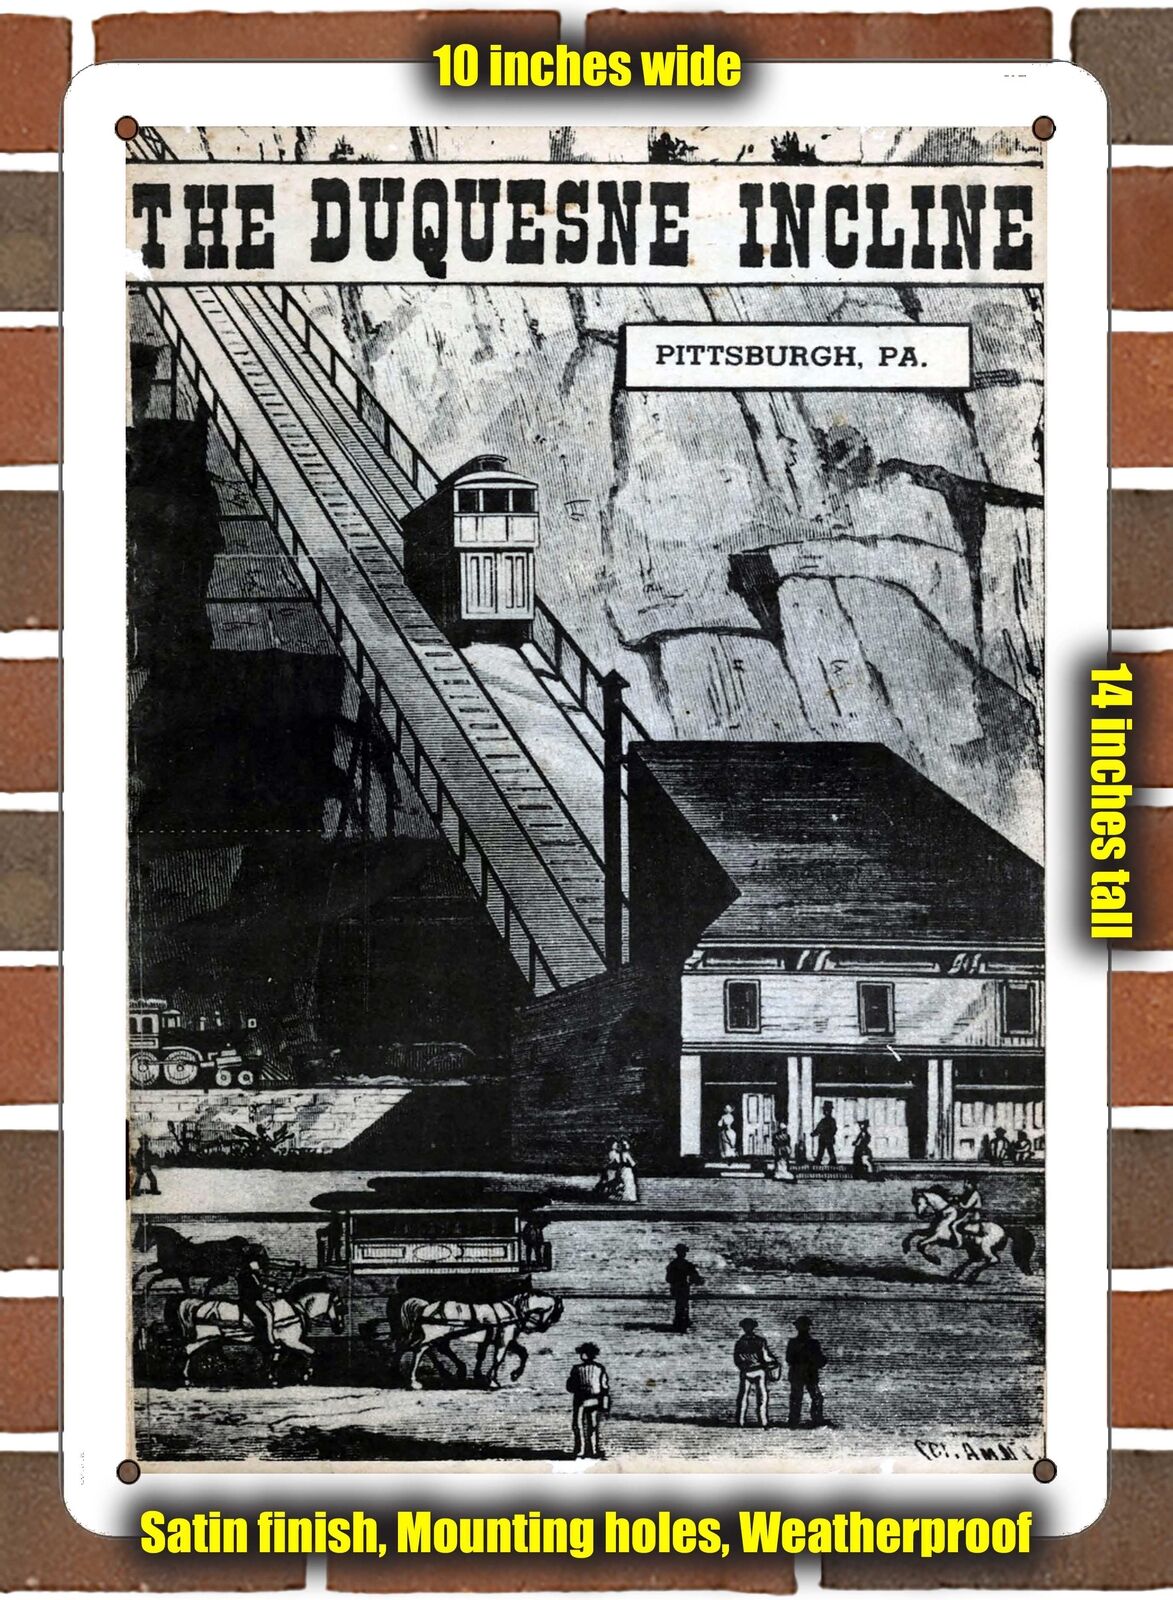 METAL SIGN - 1880 The Duquesne Incline Pittsburgh, PA - 10x14 inches